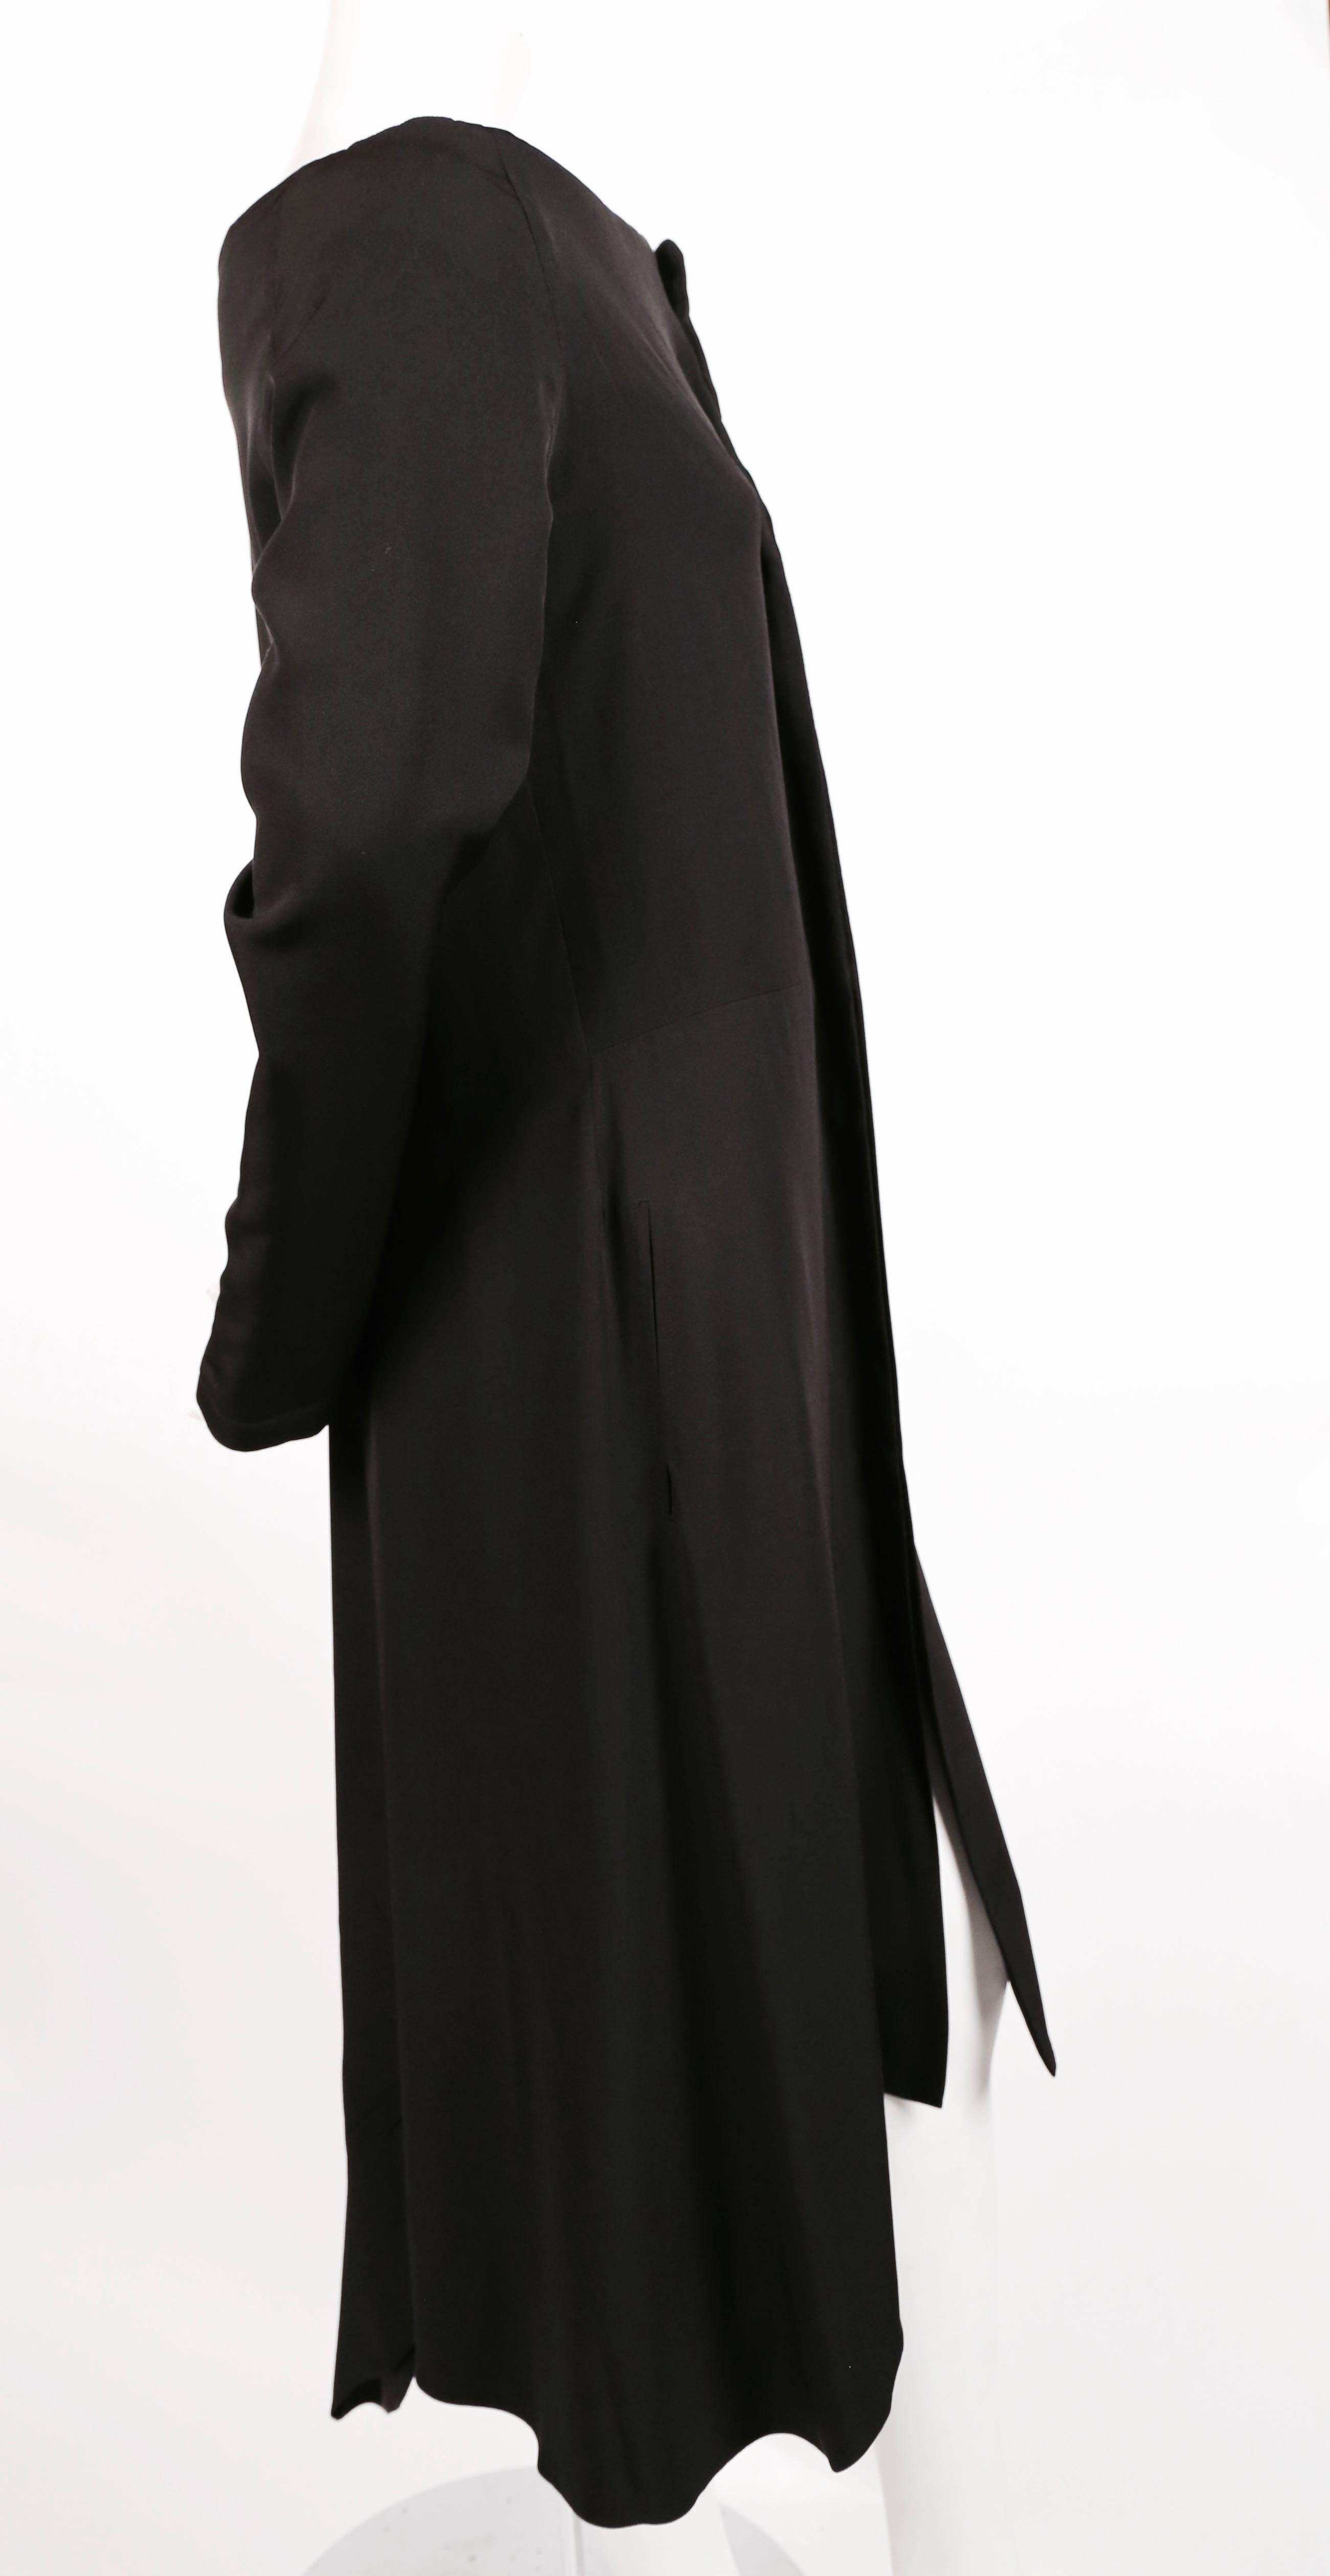 Very unusual, jet-black, lightly padded silk and wool dress with snap closure, asymmetrical hemline and exaggerated raised collar from Yohji Yamamoto dating to the 1990's. Size 2. Dress has a loose graceful fit through the body. Approximate